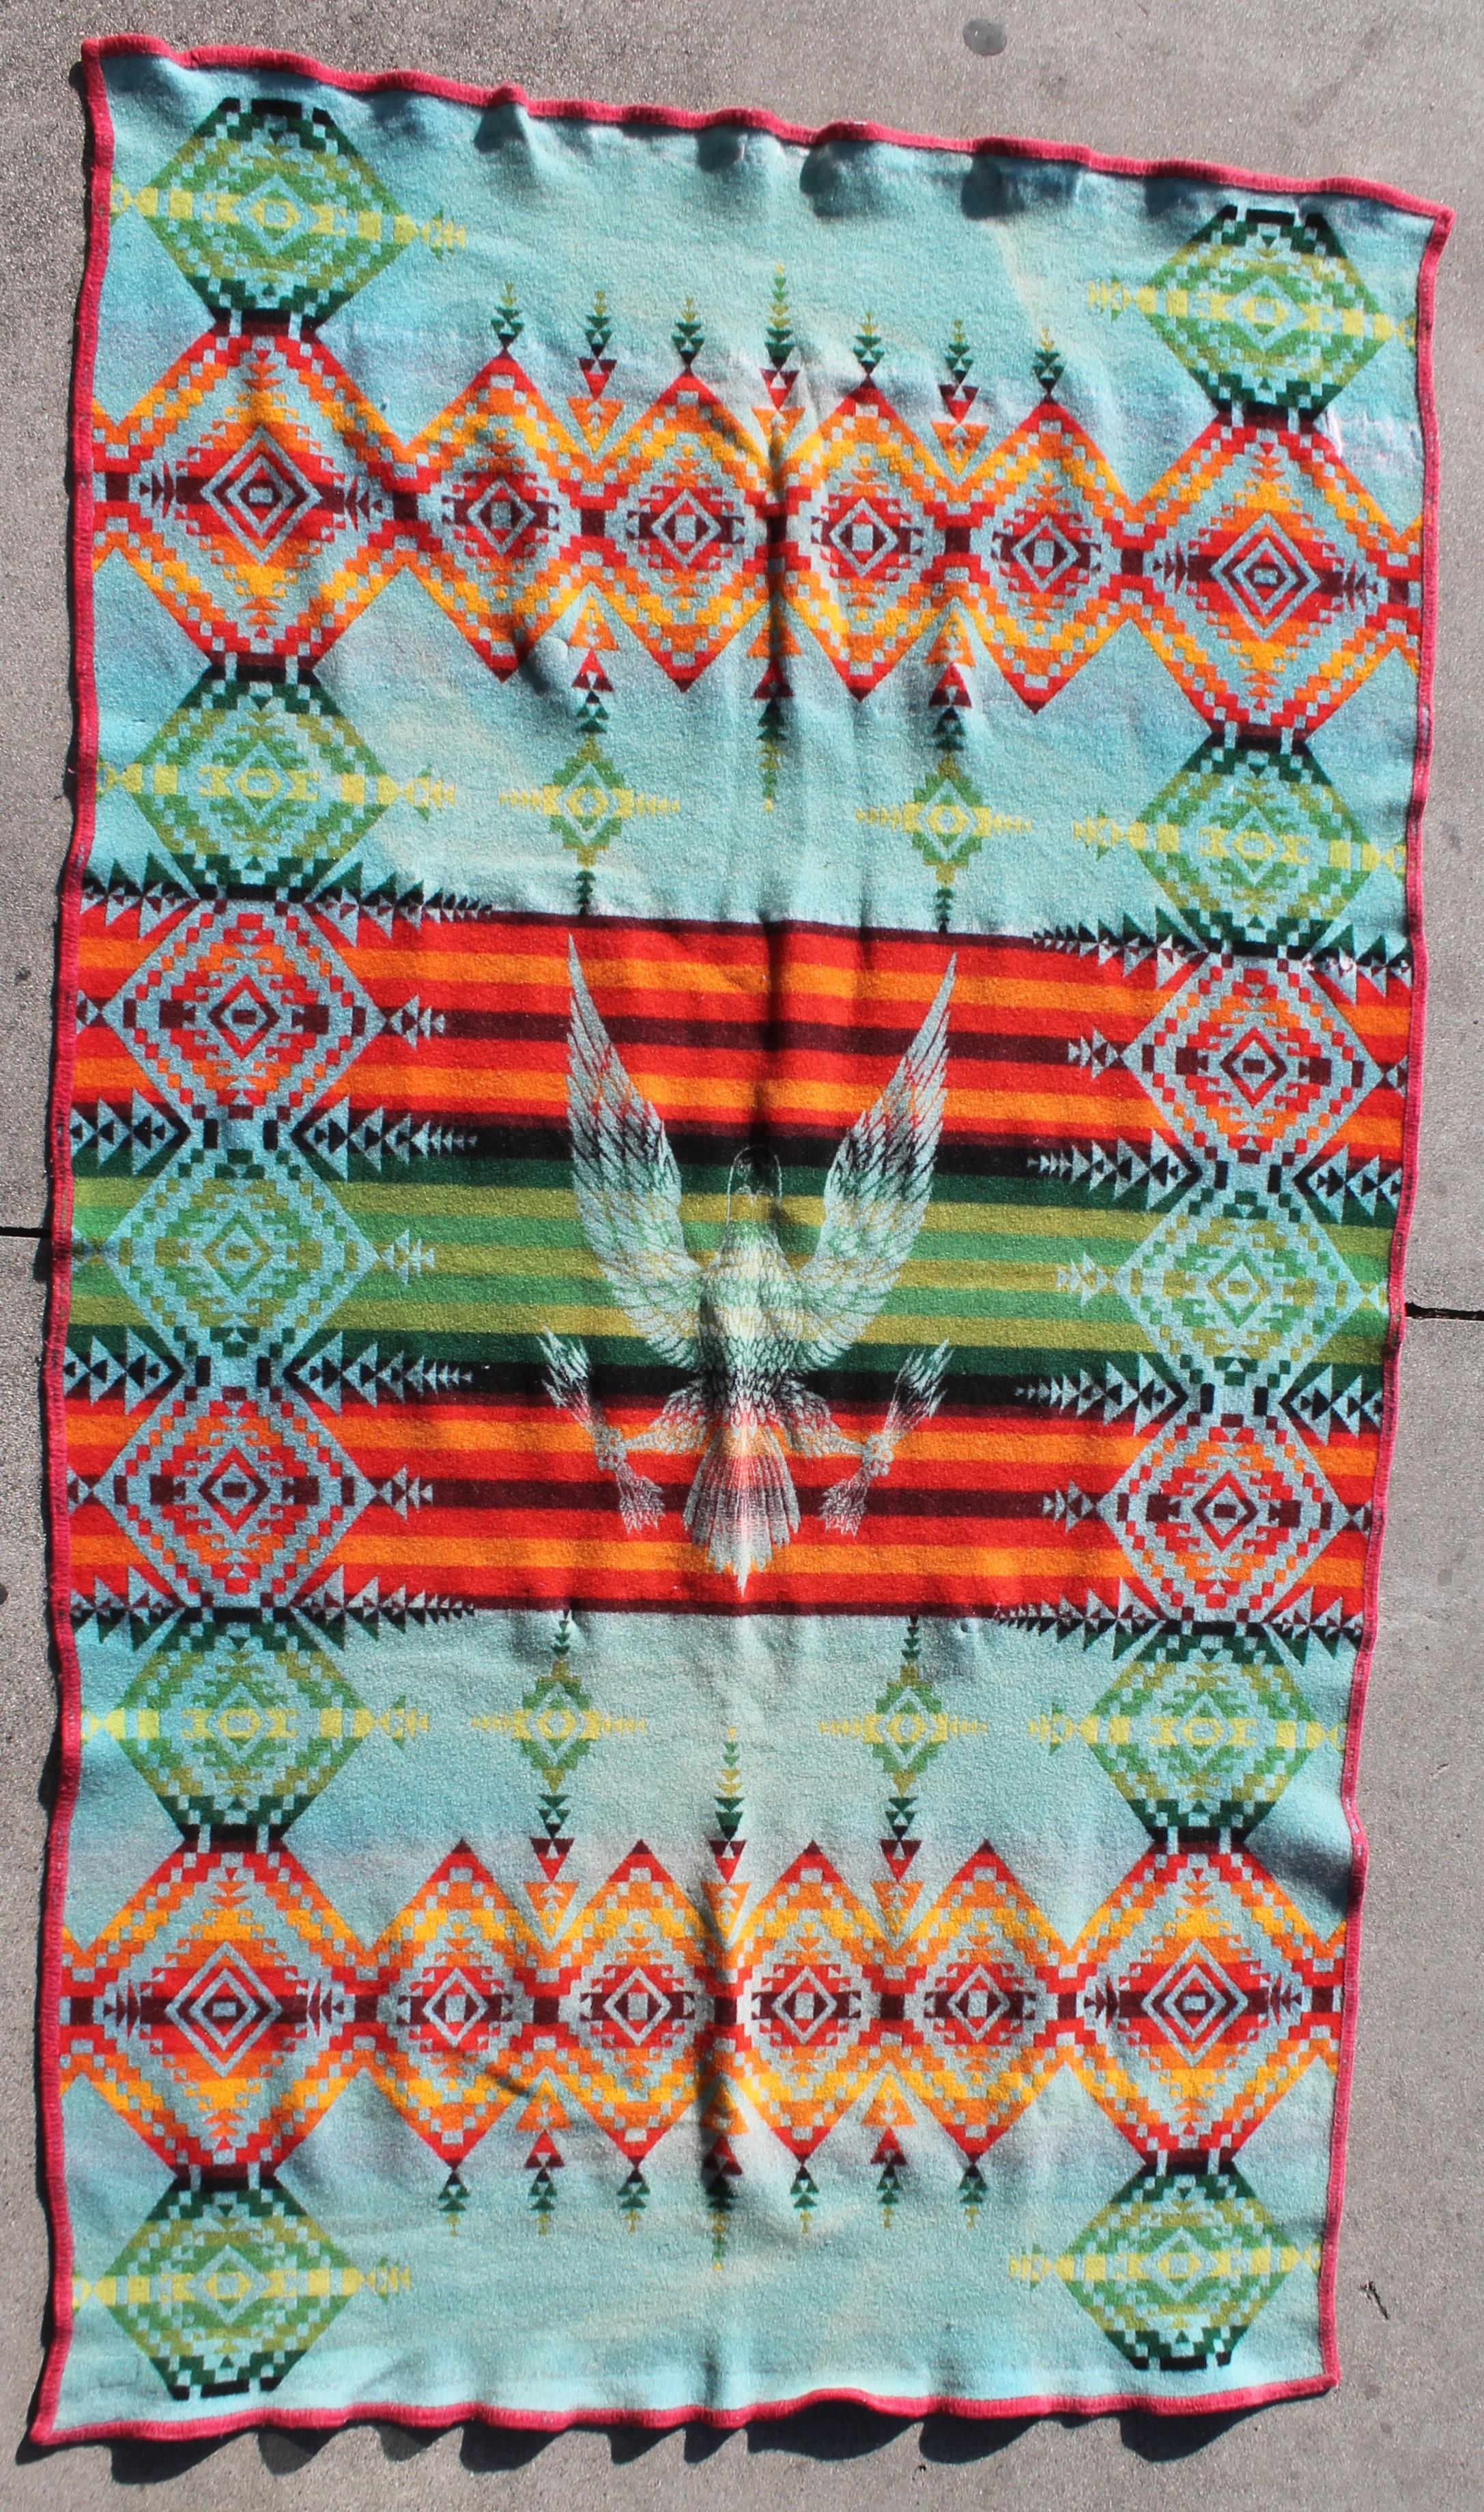 This mid-20th century blanket has a eagle pattern on both front and back of blanket. This blanket has wear but is really quite rare and unusual to find.